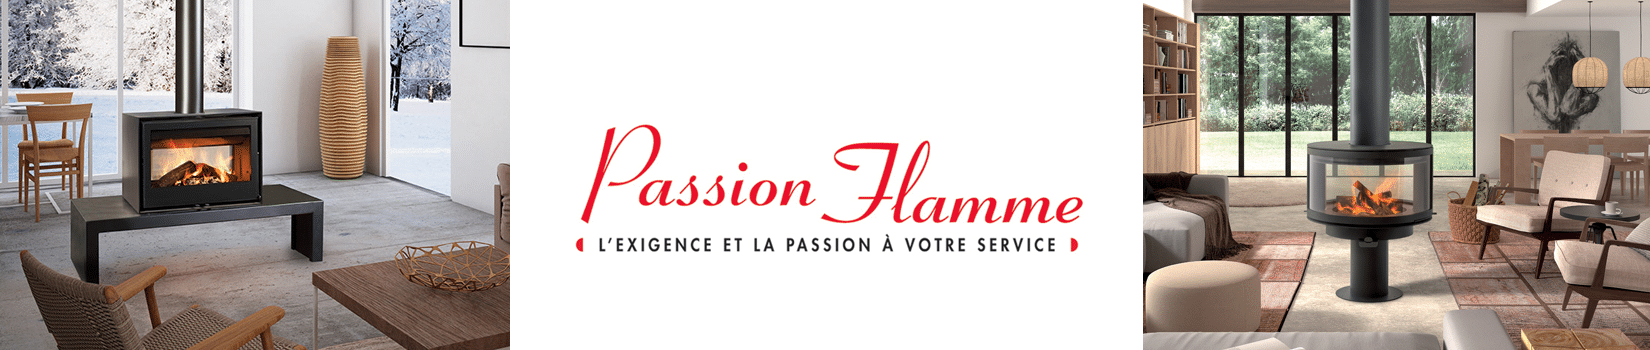 Passion flamme